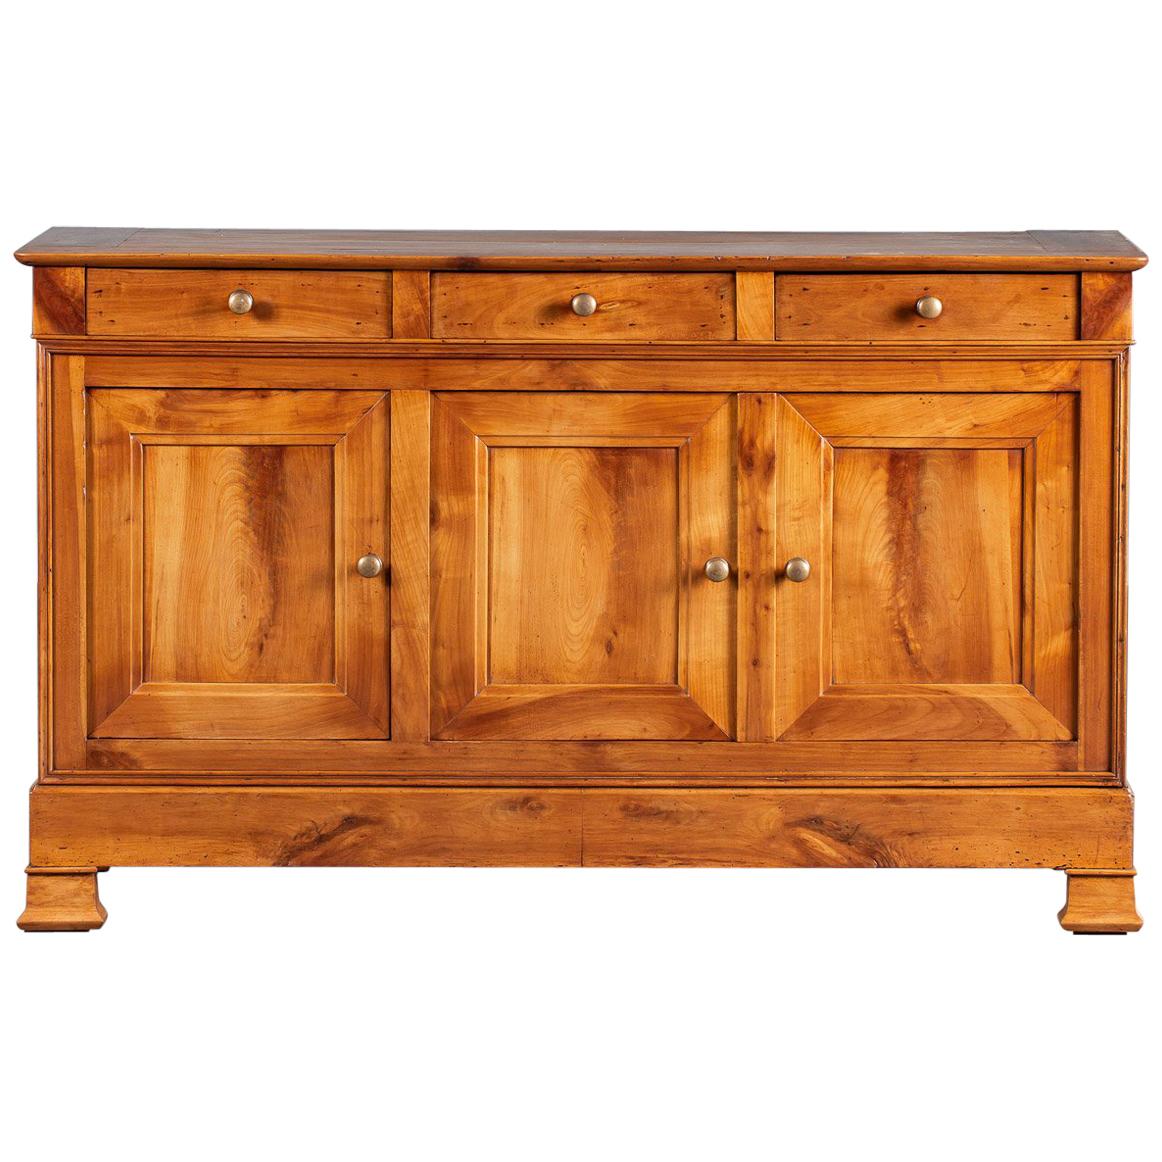 Louis Philippe Antique French Cherry Wood Enfilade Buffet Credenza, circa 1850